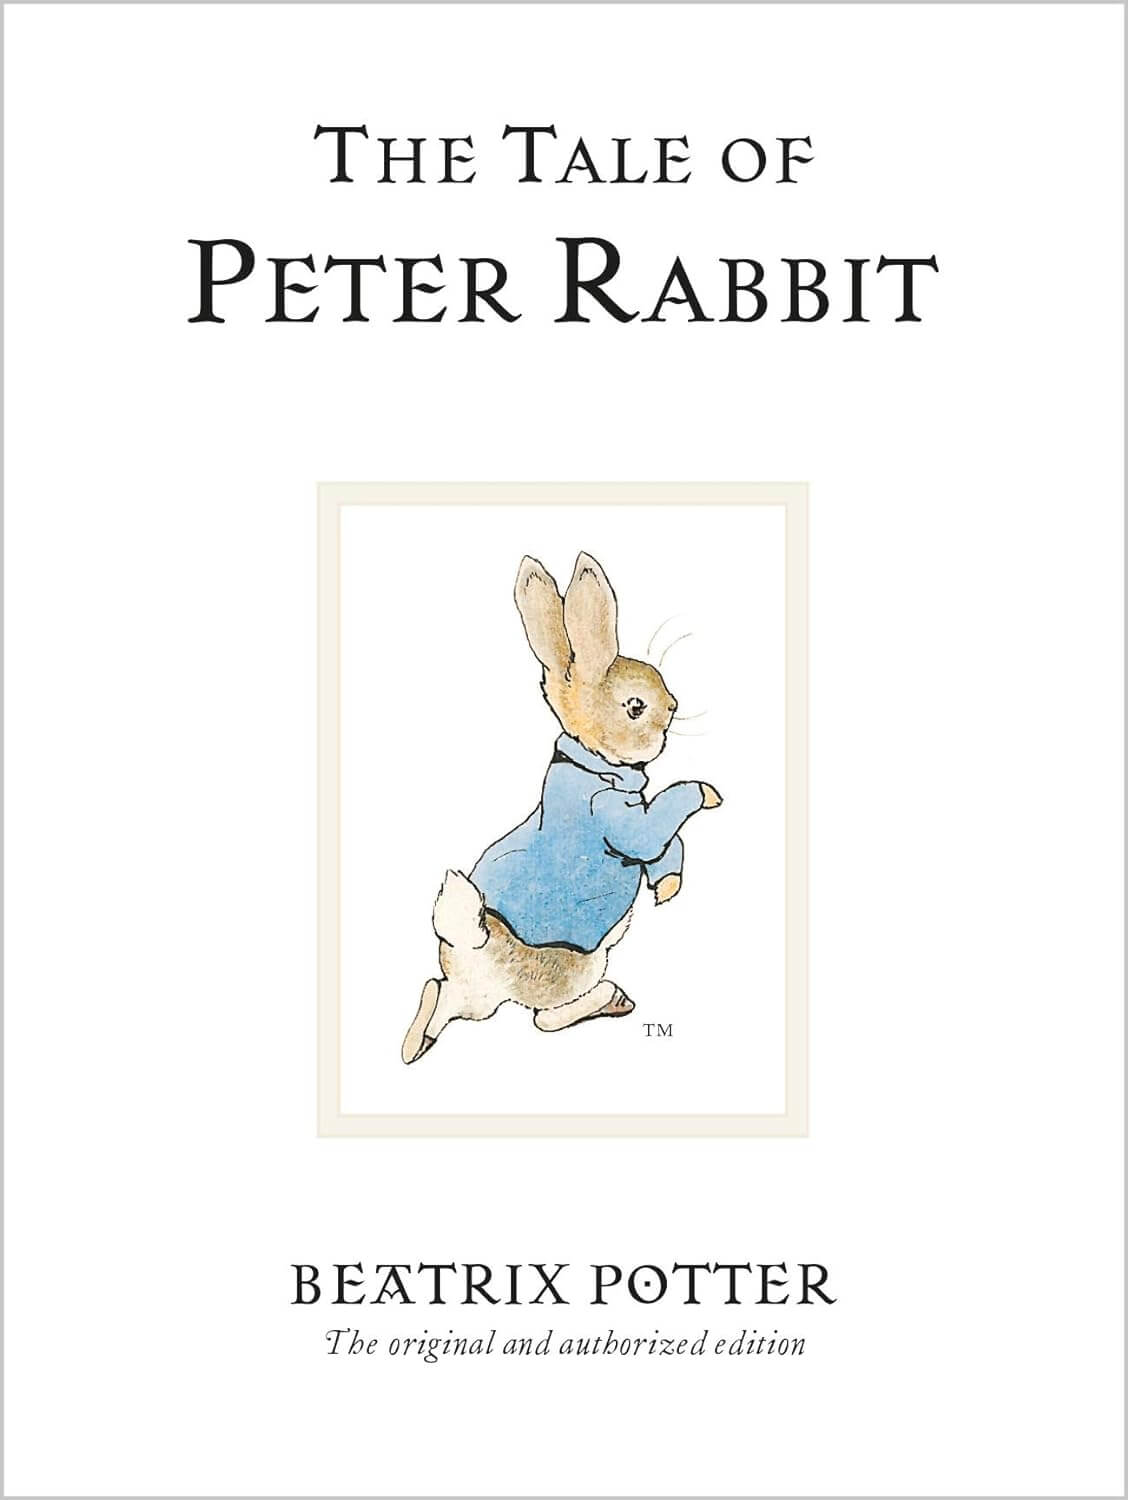 Tale of Peter Rabbit book cover featuring mostly white background and a rabbit wearing a blue jacket